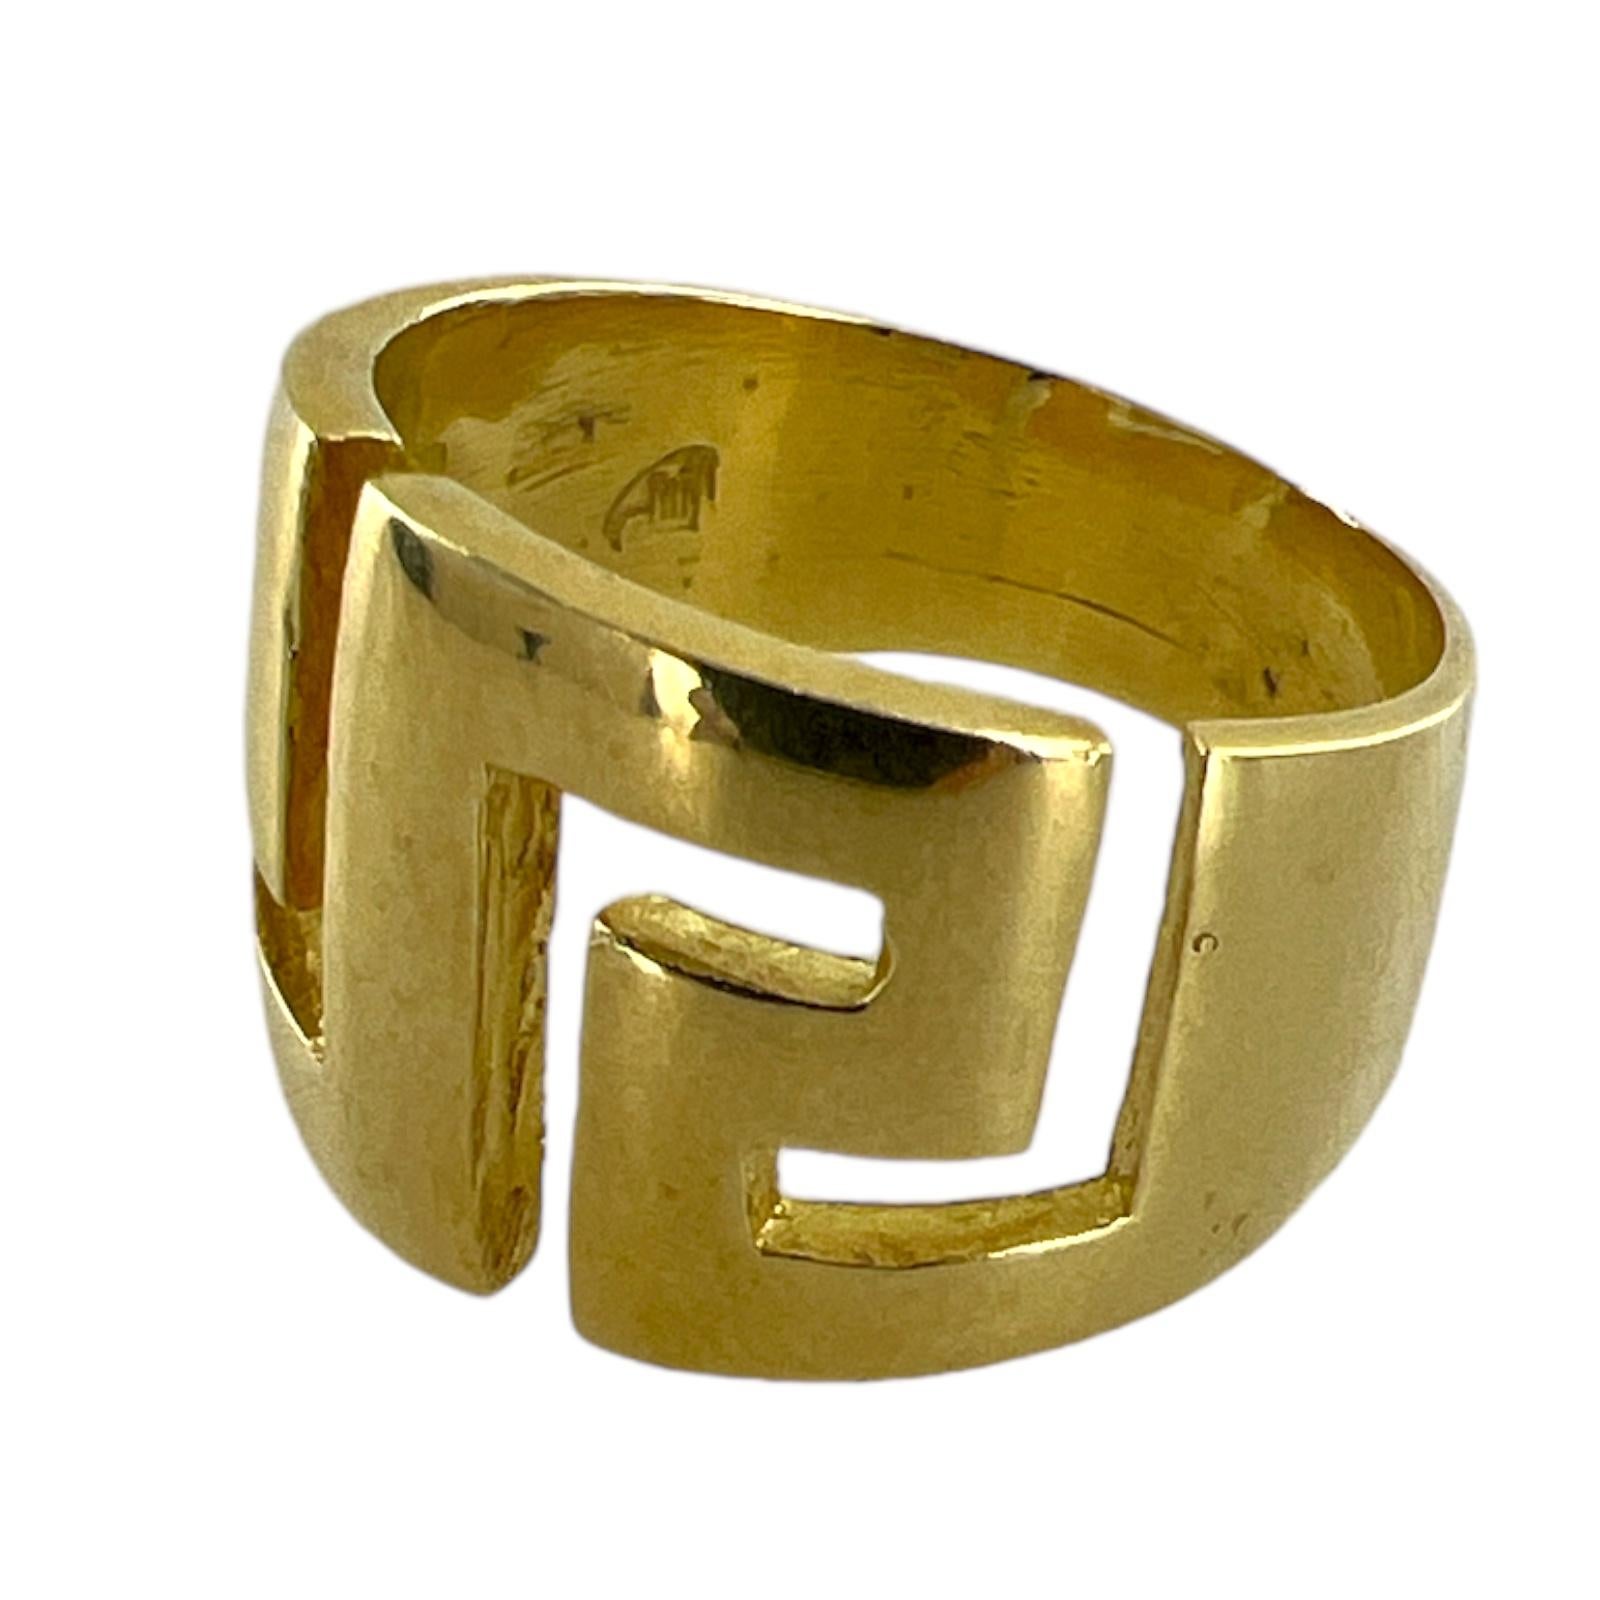 Greek key design ring crafted in 18 karat yellow gold. The band features a cut out Greek key design measuring 15mm in width and tapering down to 6mm in the back. The ring is currently size 9 (can be sized). 